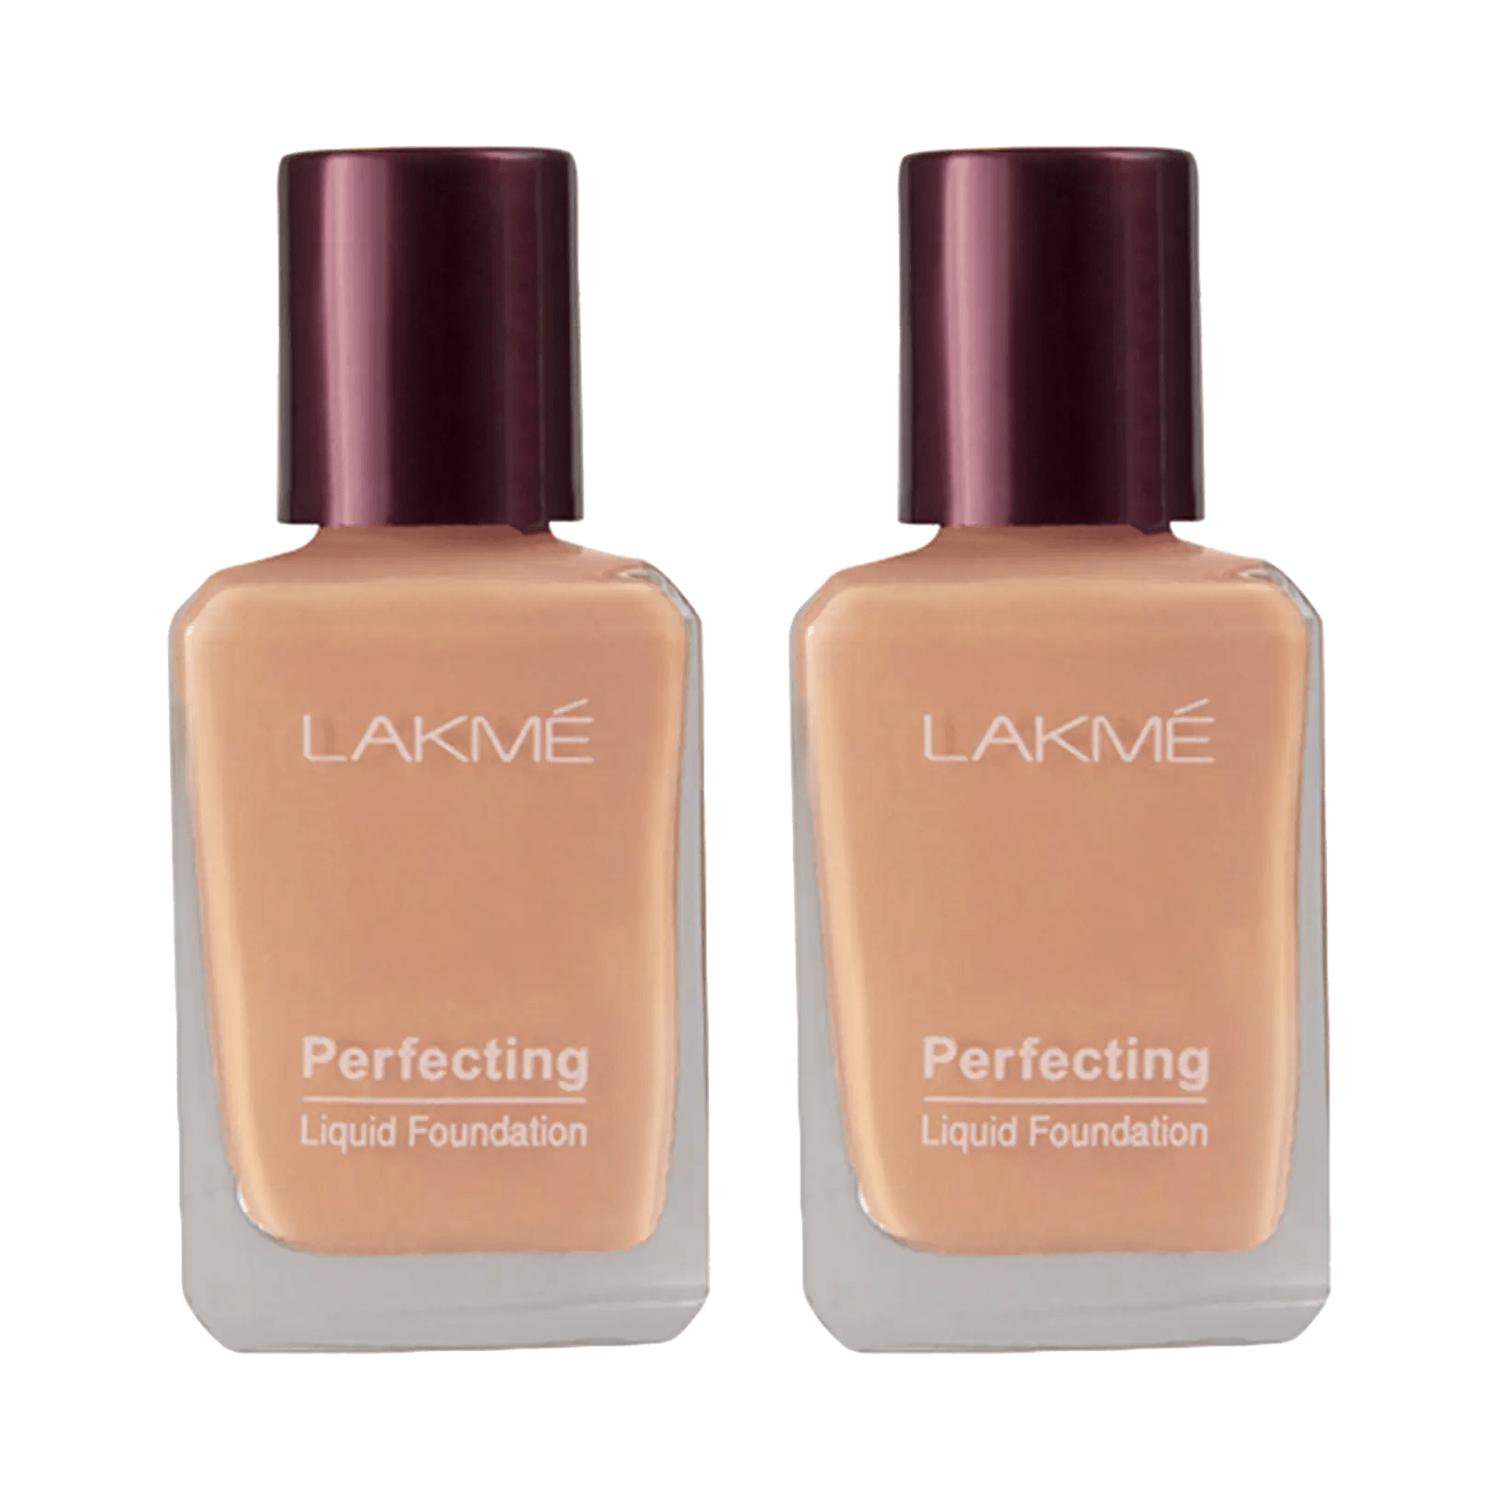 Lakme | Lakme Perfecting Liquid Foundation Natural Marble (27 ml) - (Pack of 2)